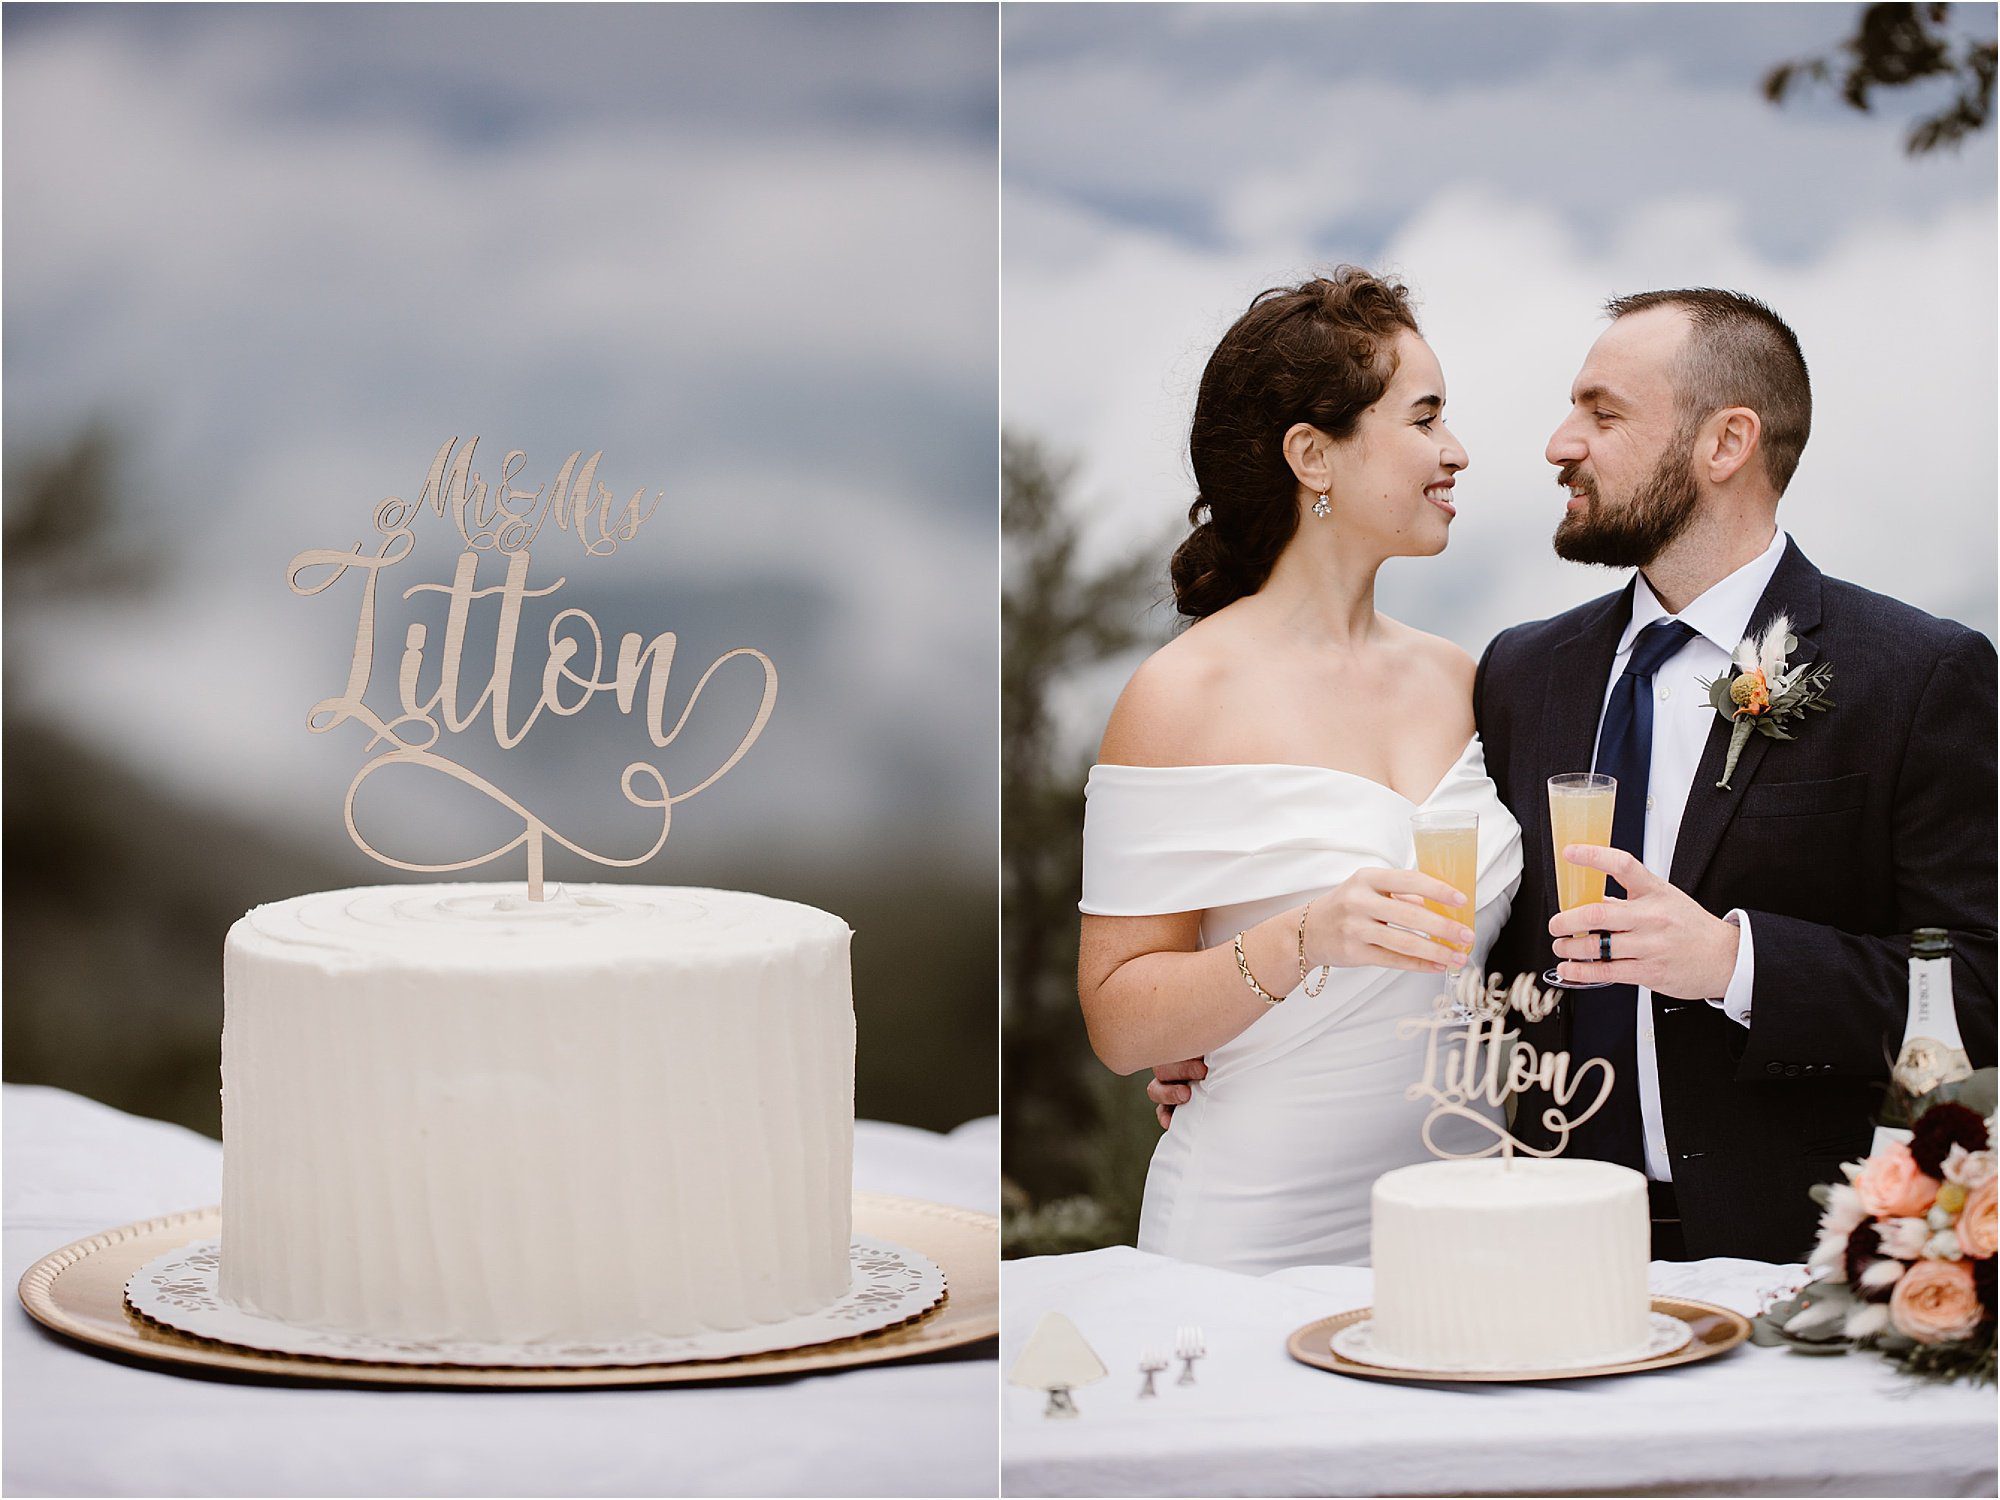 bride and groom toast and eat cake at elopement